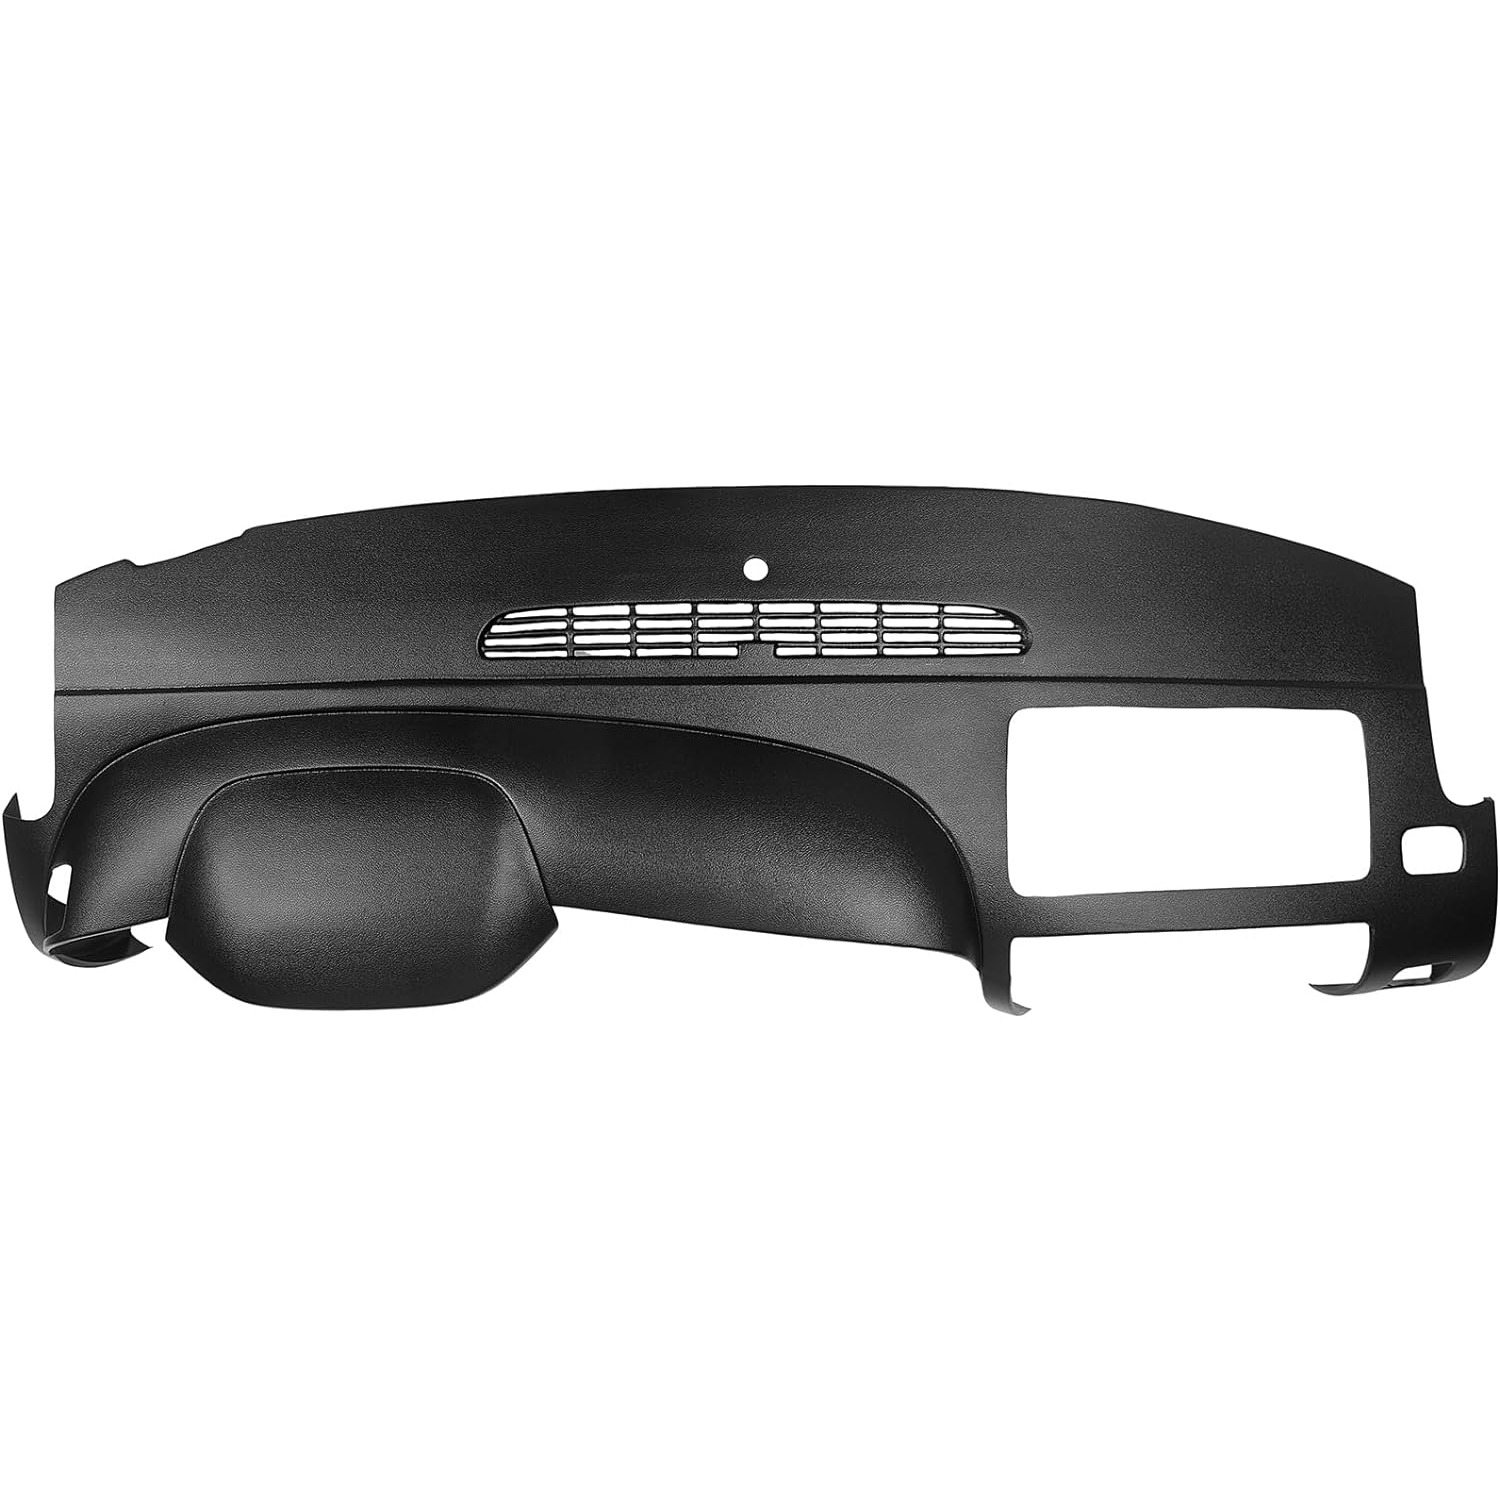 

Black Dashboard Cover For 2007-2013 Ls Lt Wt & Sl Sle Wt With Dual Glovebox